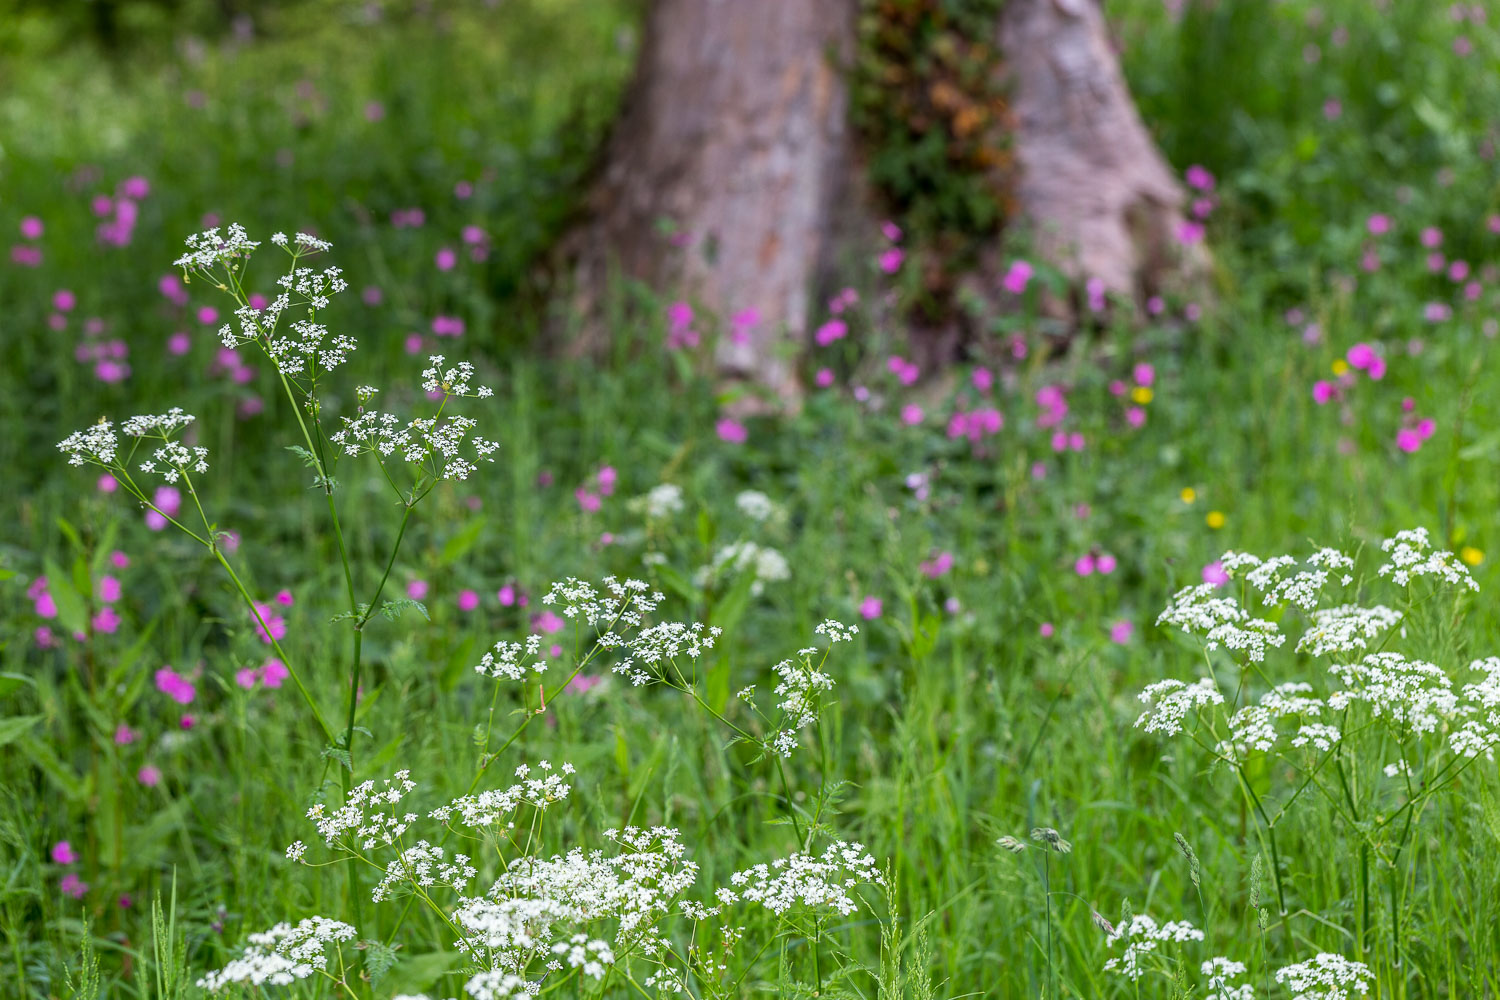 Cow parsley at Holker Hall